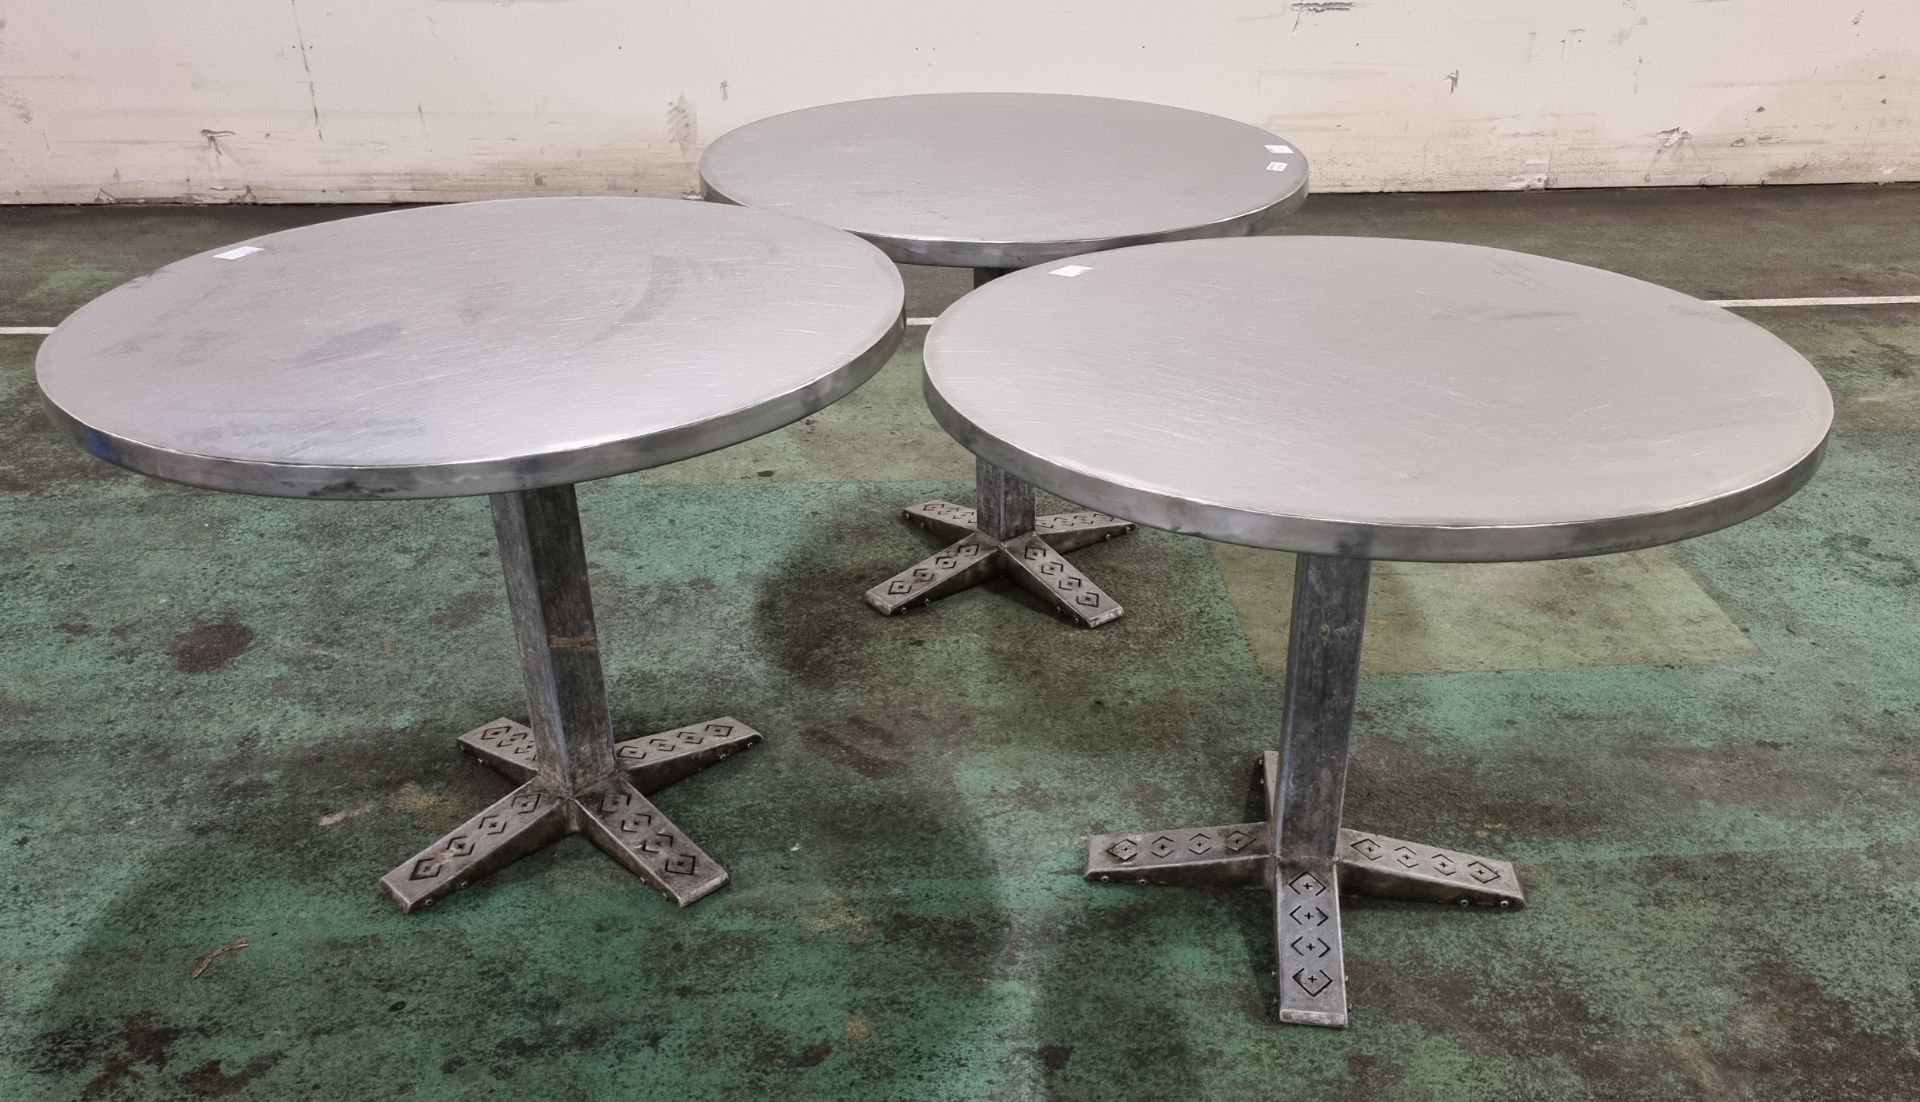 3x Round metal tables - W 930 x D 930 x H 740 mm - Image 2 of 5